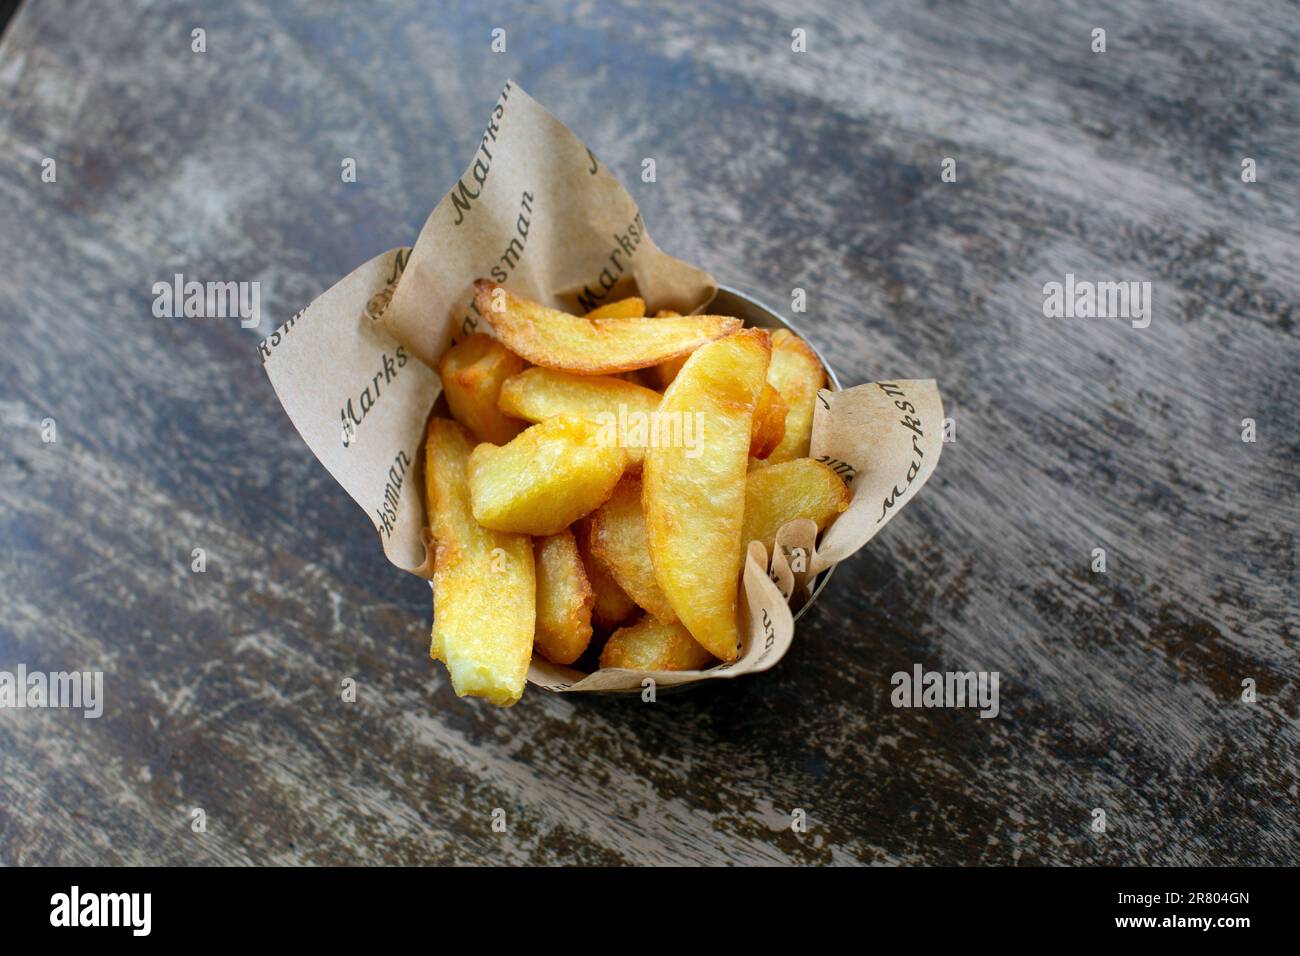 Potato chips on wooden table Stock Photo